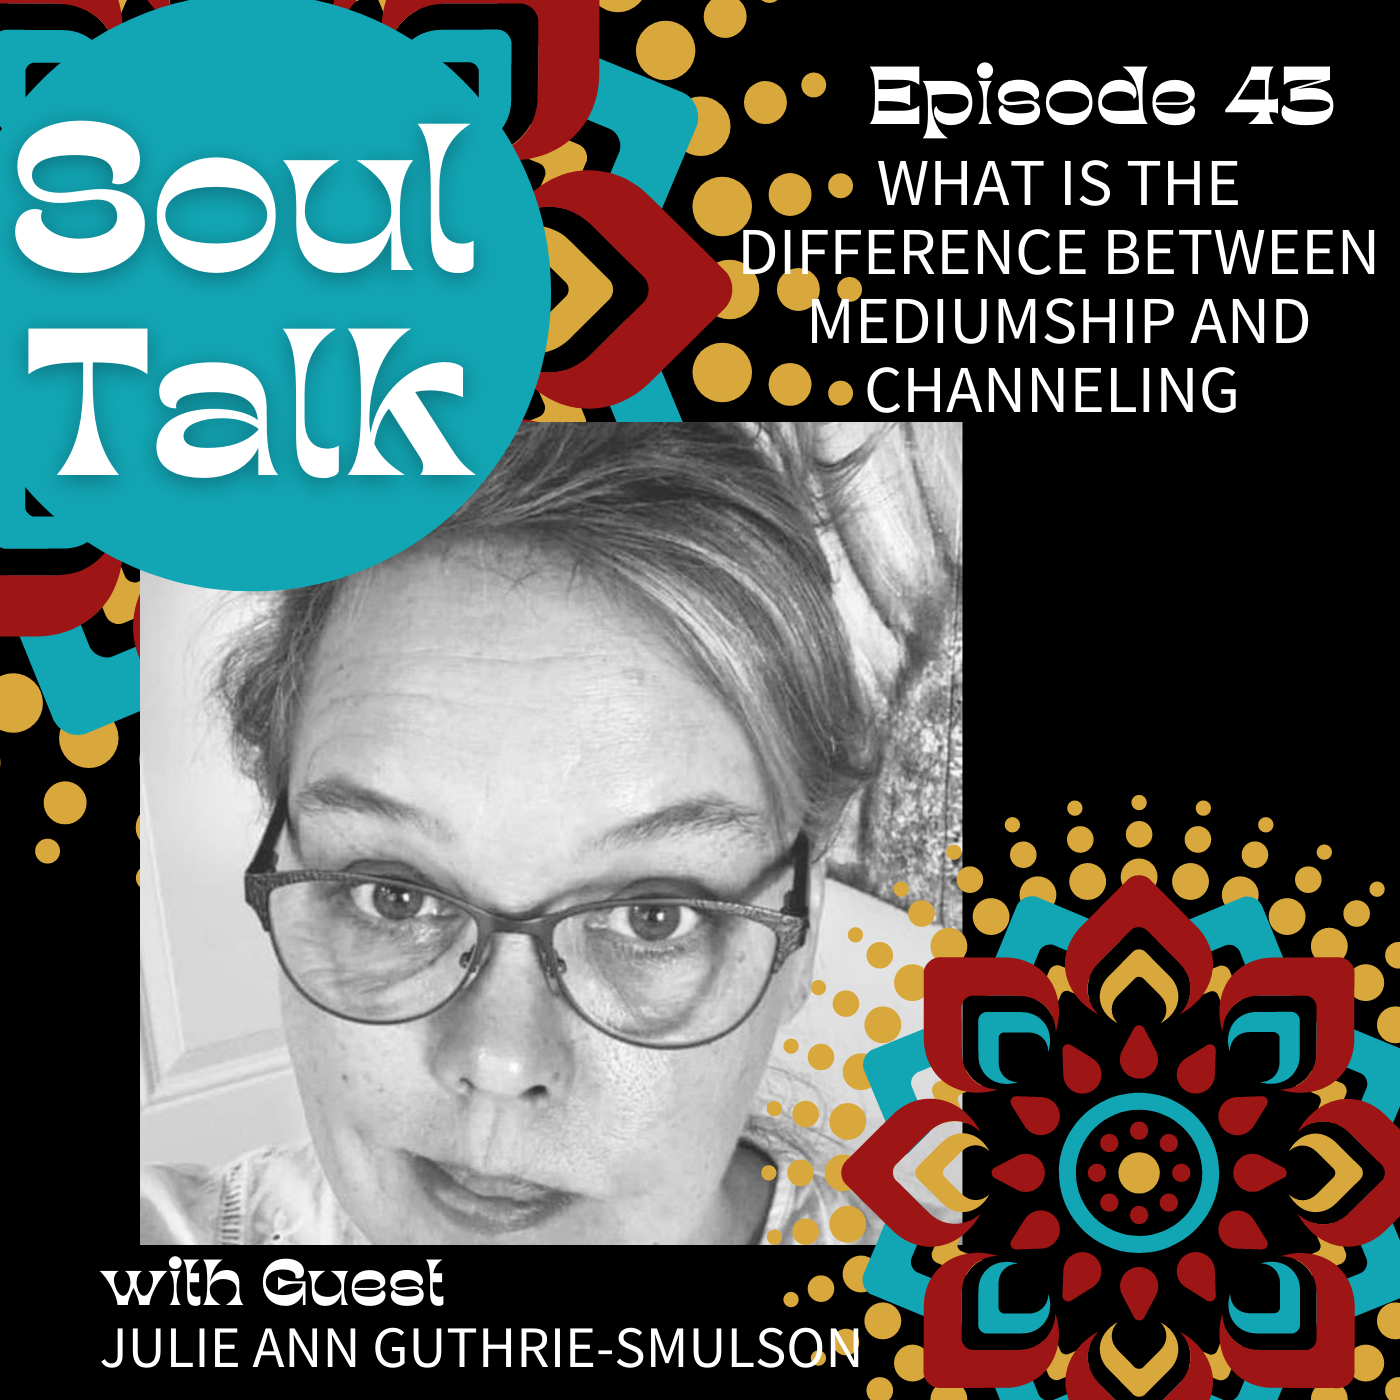 What is the Difference Between Mediumship and Channeling - Julie Ann Guthrie-Smulson